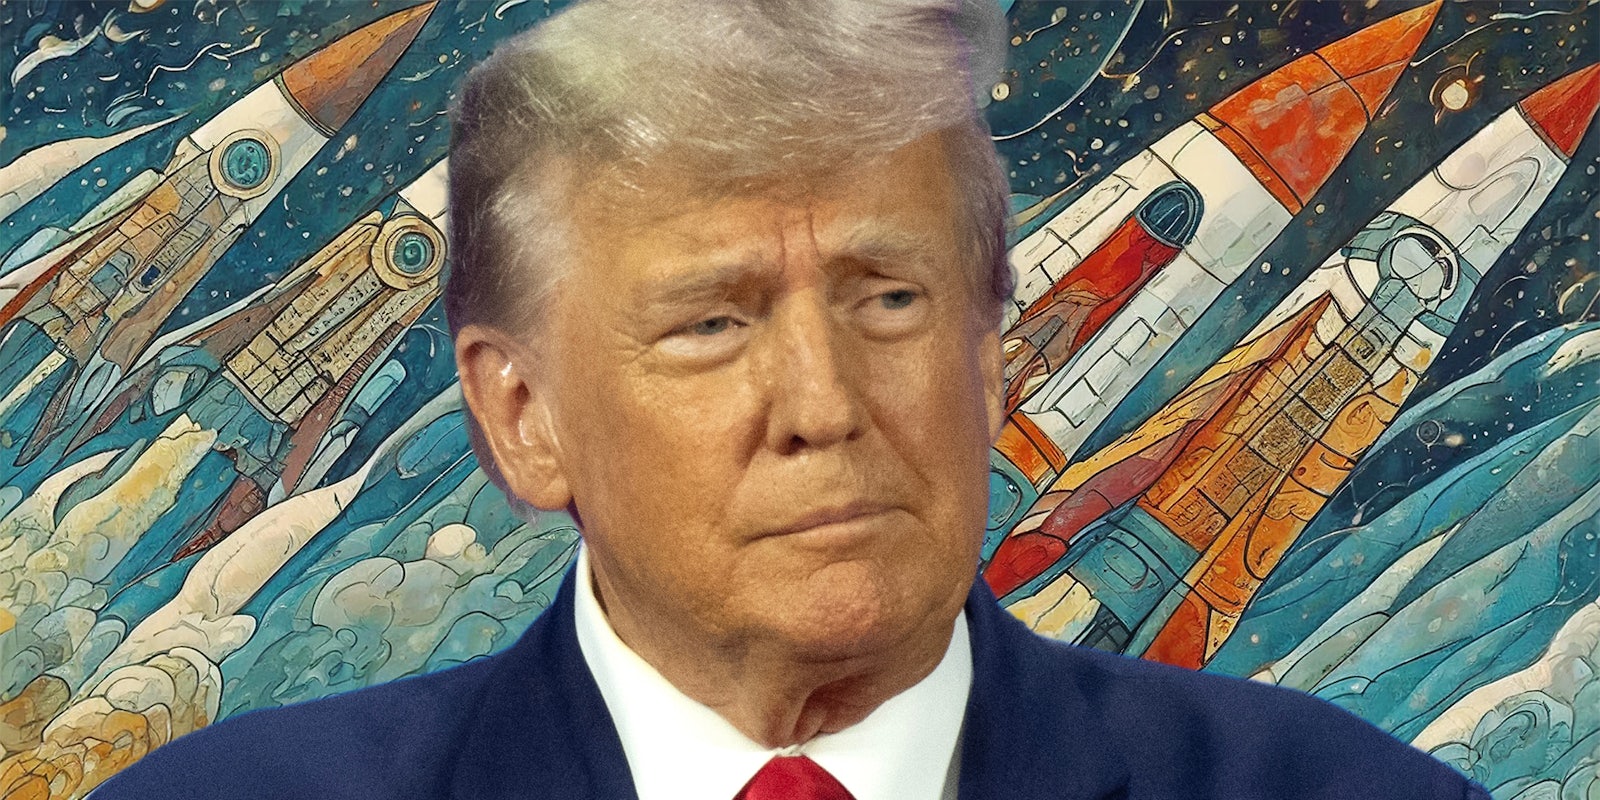 Donald Trump with missiles in the background